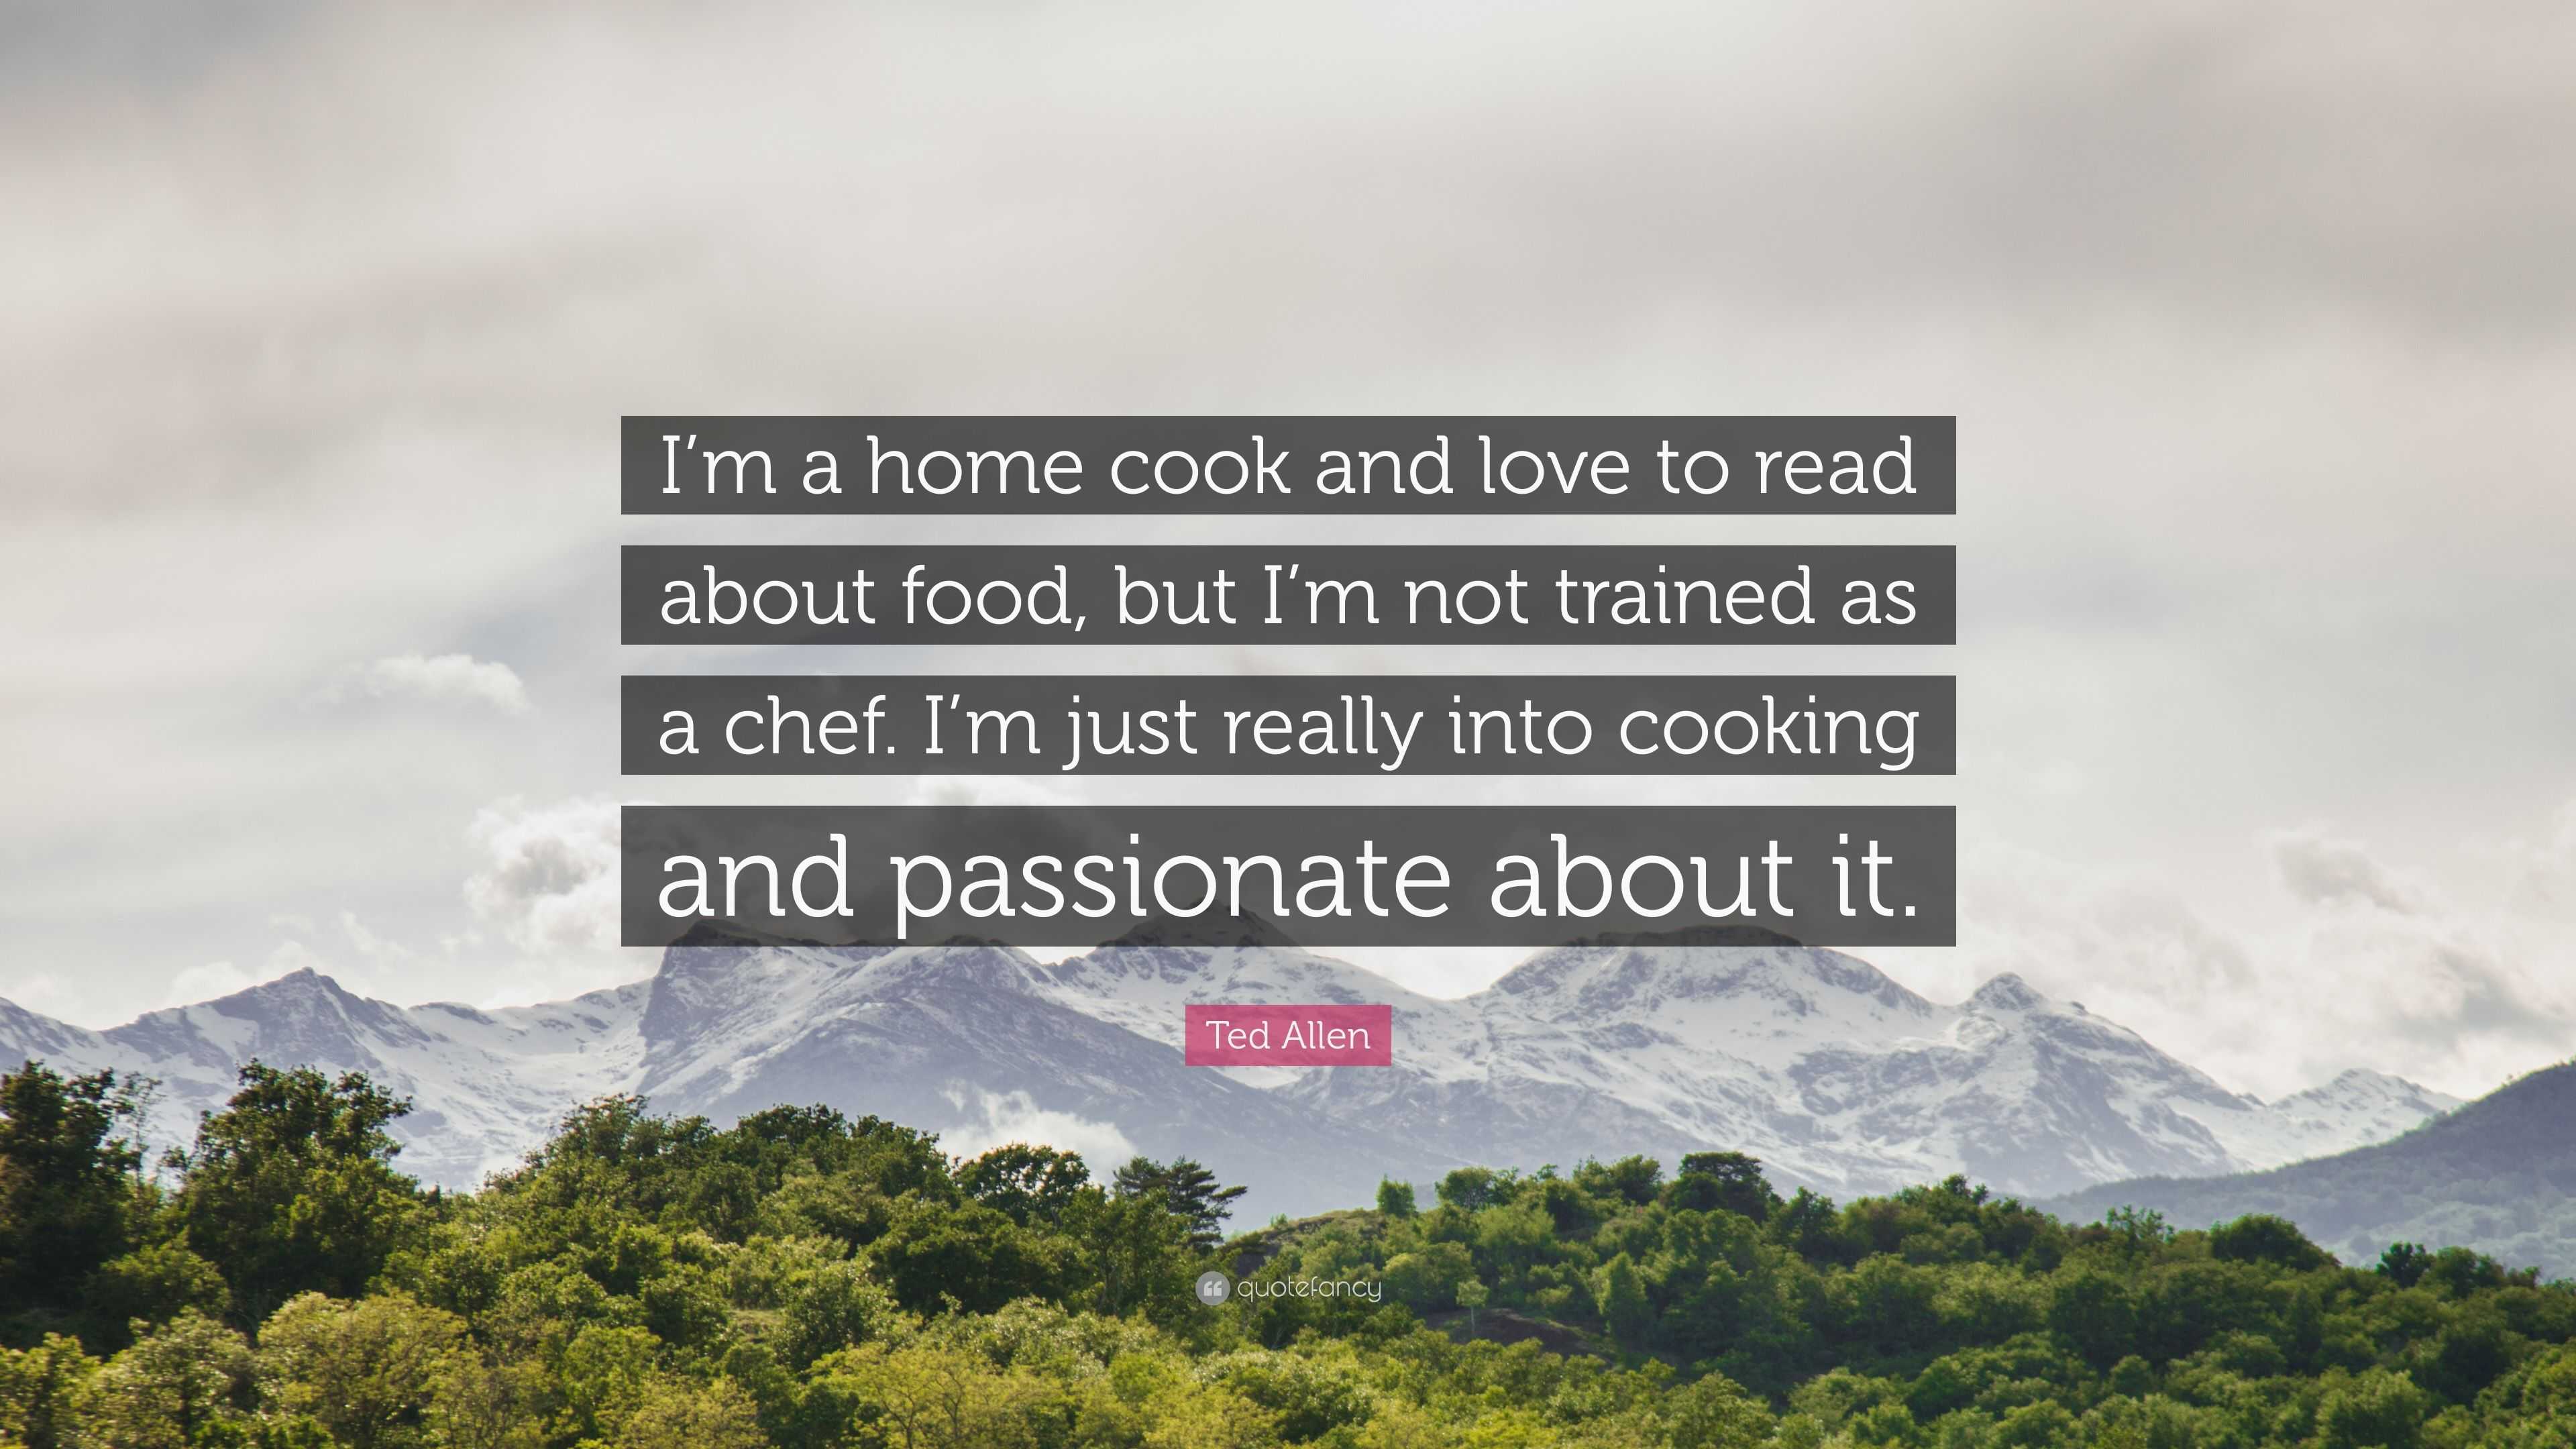 https://quotefancy.com/media/wallpaper/3840x2160/4396975-Ted-Allen-Quote-I-m-a-home-cook-and-love-to-read-about-food-but-I.jpg